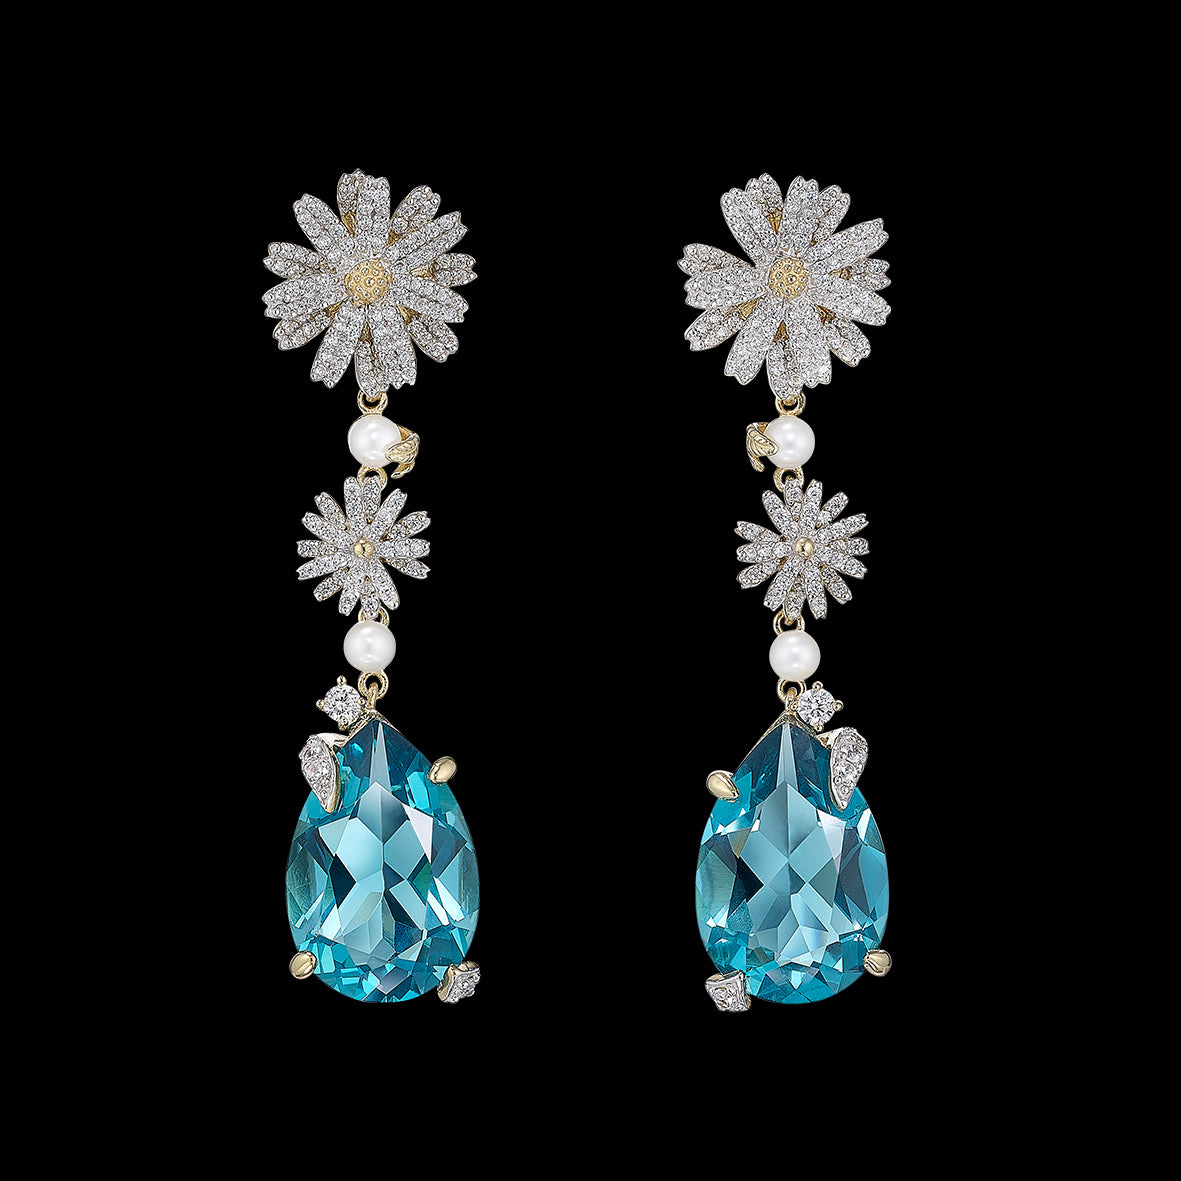 Aqua Daisy Drop Earrings, Earrings, Anabela Chan Joaillerie - Fine jewelry with laboratory grown and created gemstones hand-crafted in the United Kingdom. Anabela Chan Joaillerie is the first fine jewellery brand in the world to champion laboratory-grown and created gemstones with high jewellery design, artisanal craftsmanship and a focus on ethical and sustainable innovations.